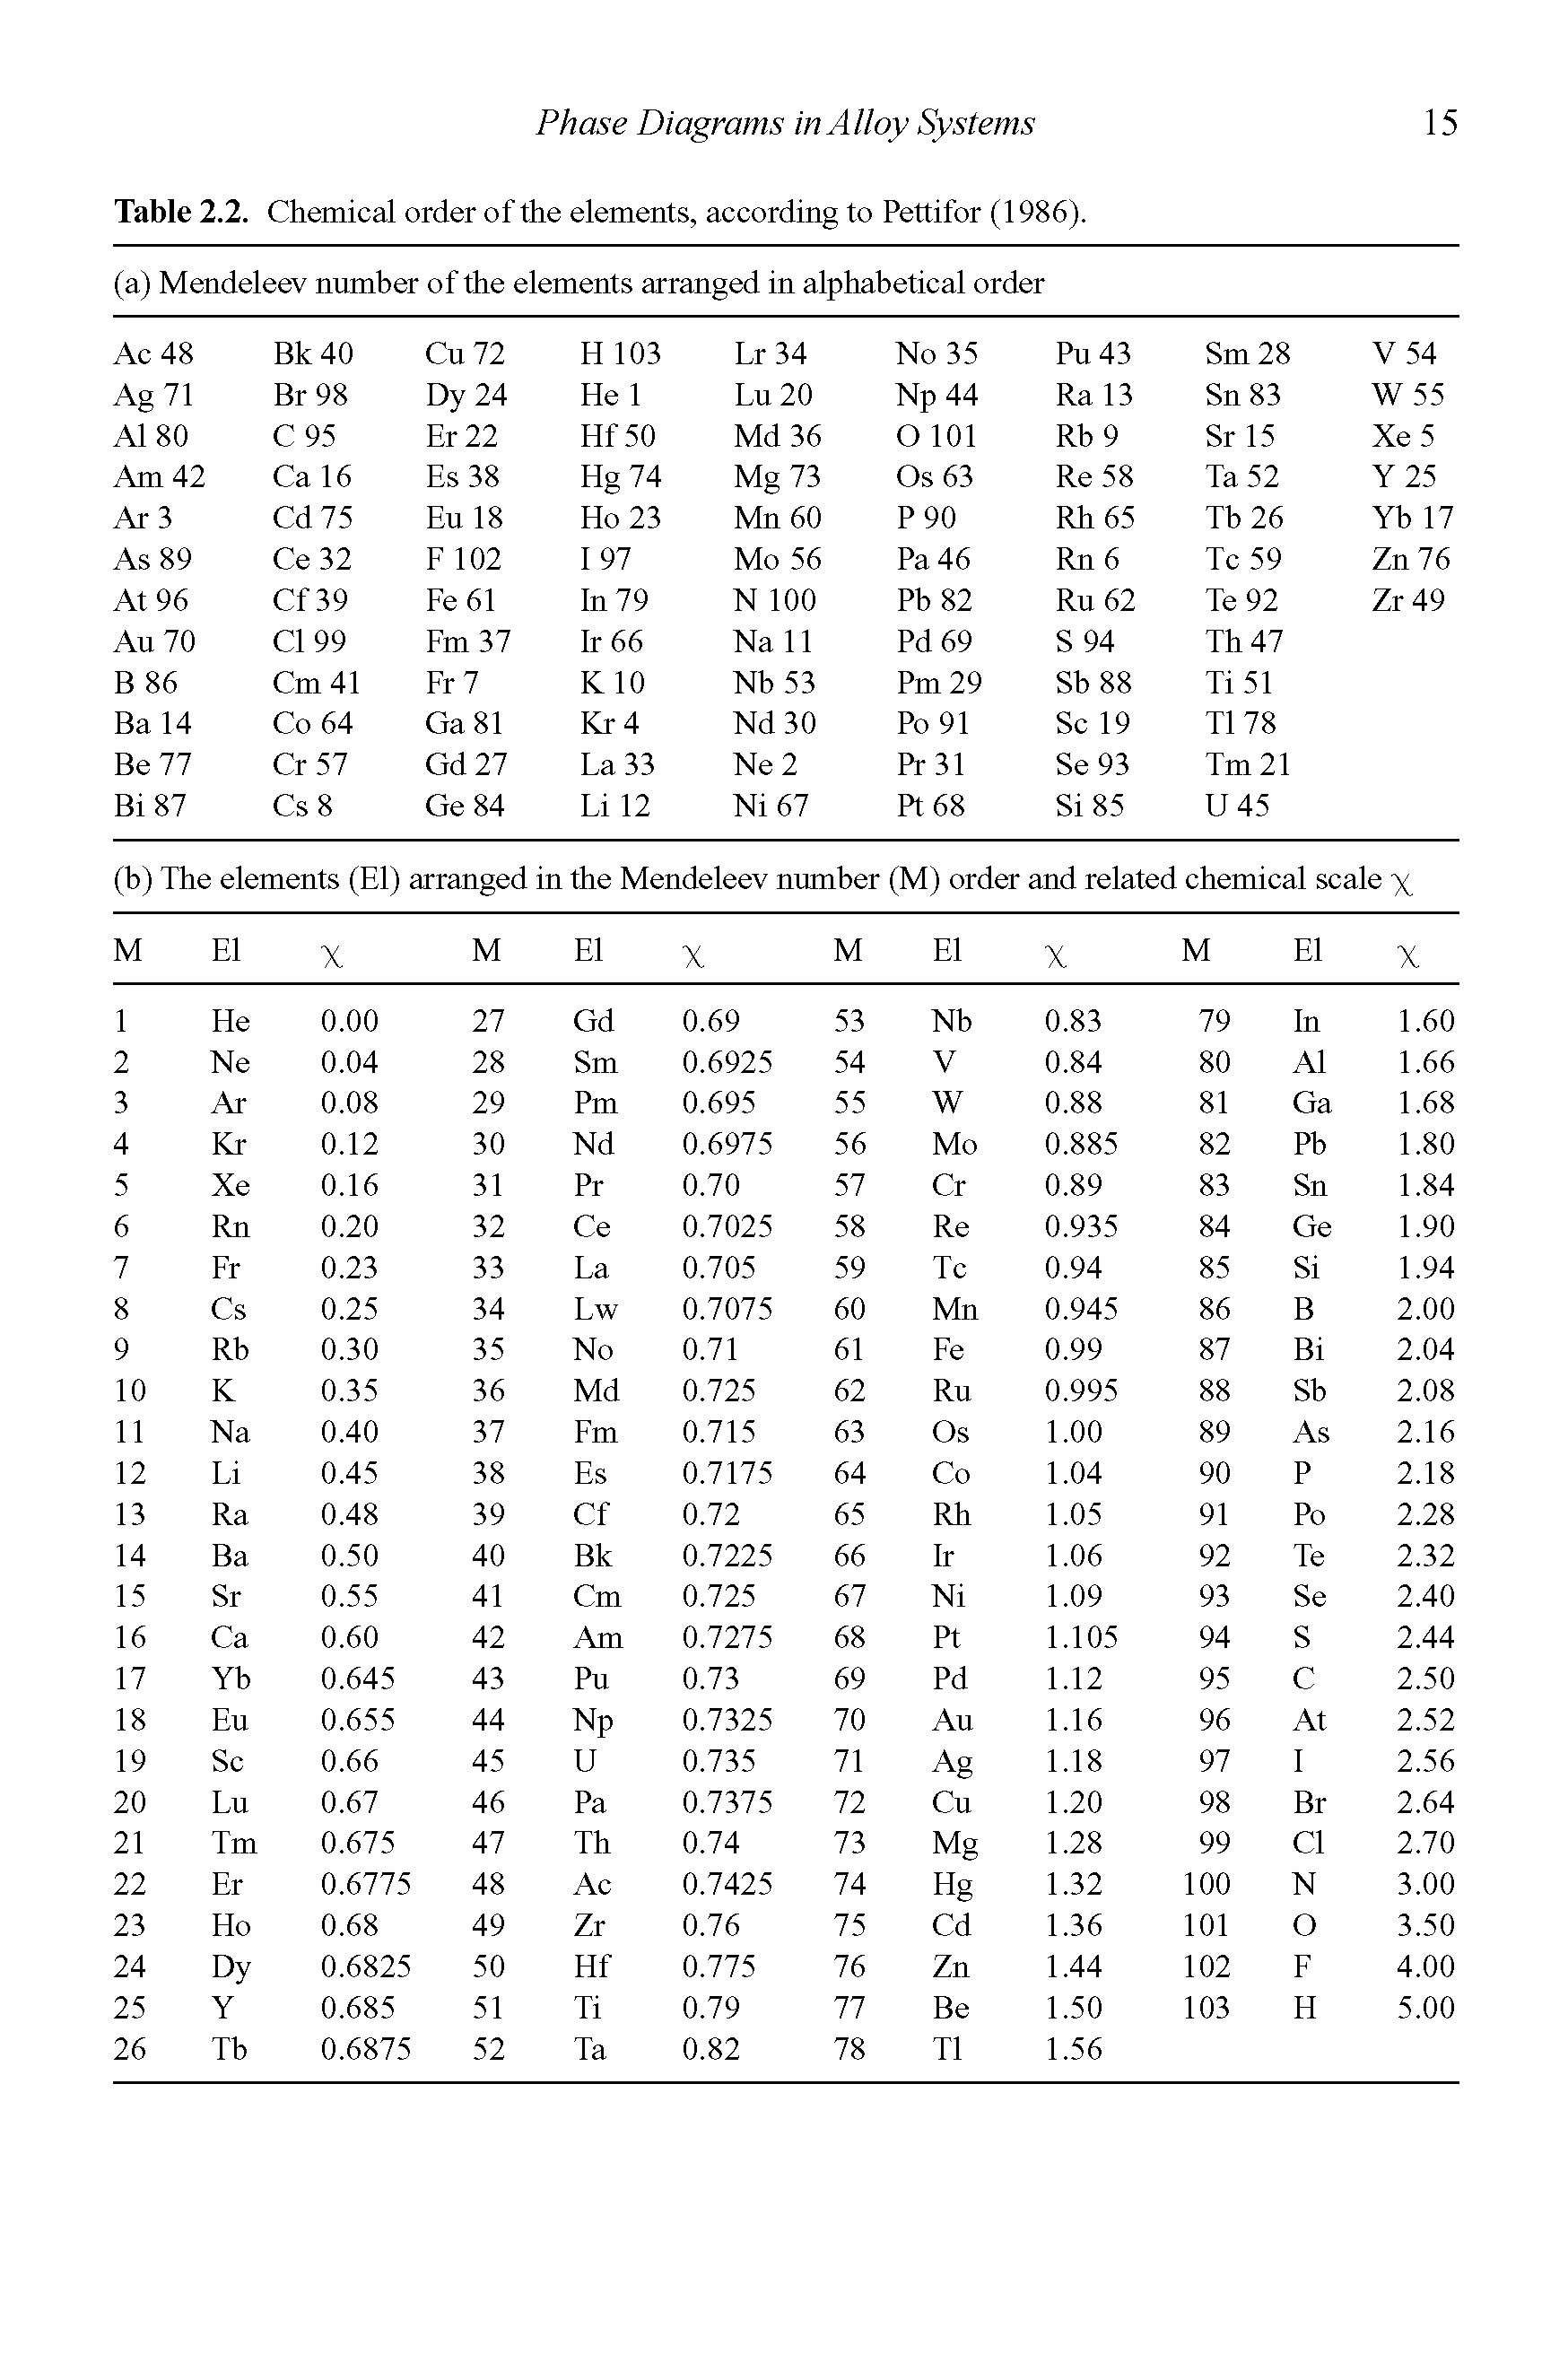 Table 2.2. Chemical order of the elements, according to Pettifor (1986).